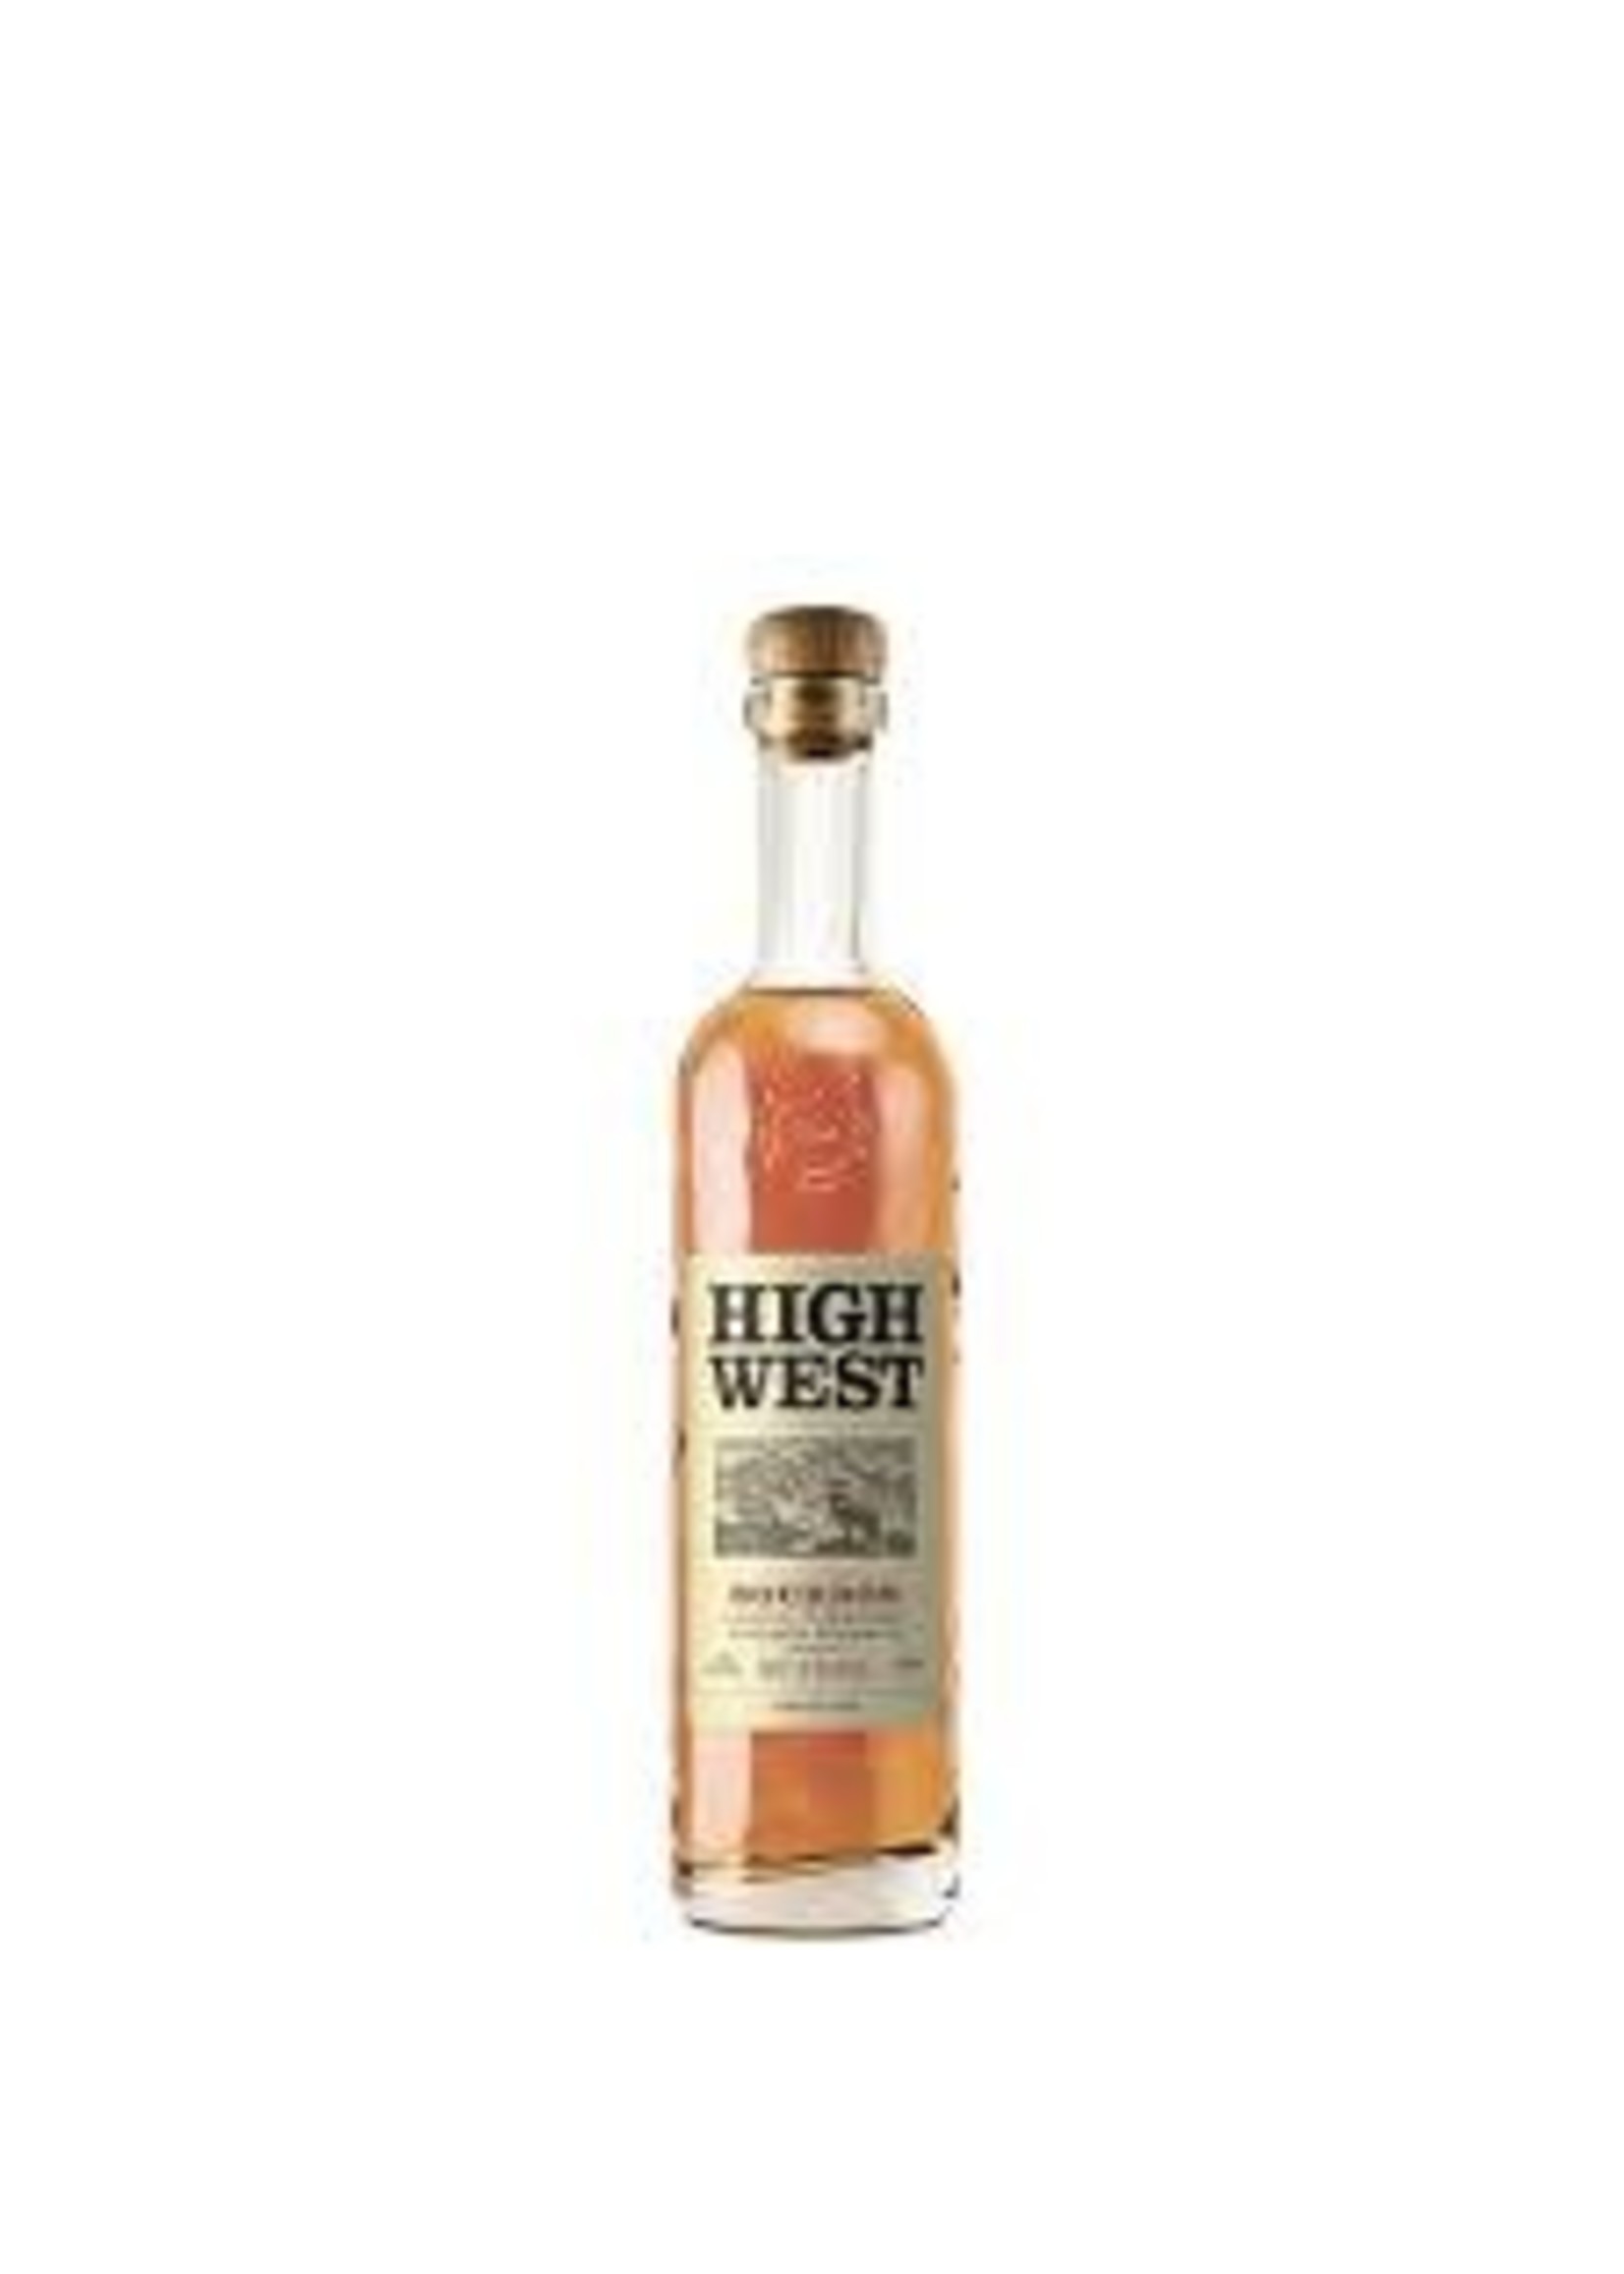 HIGH WEST RENDEZVOUS RYE